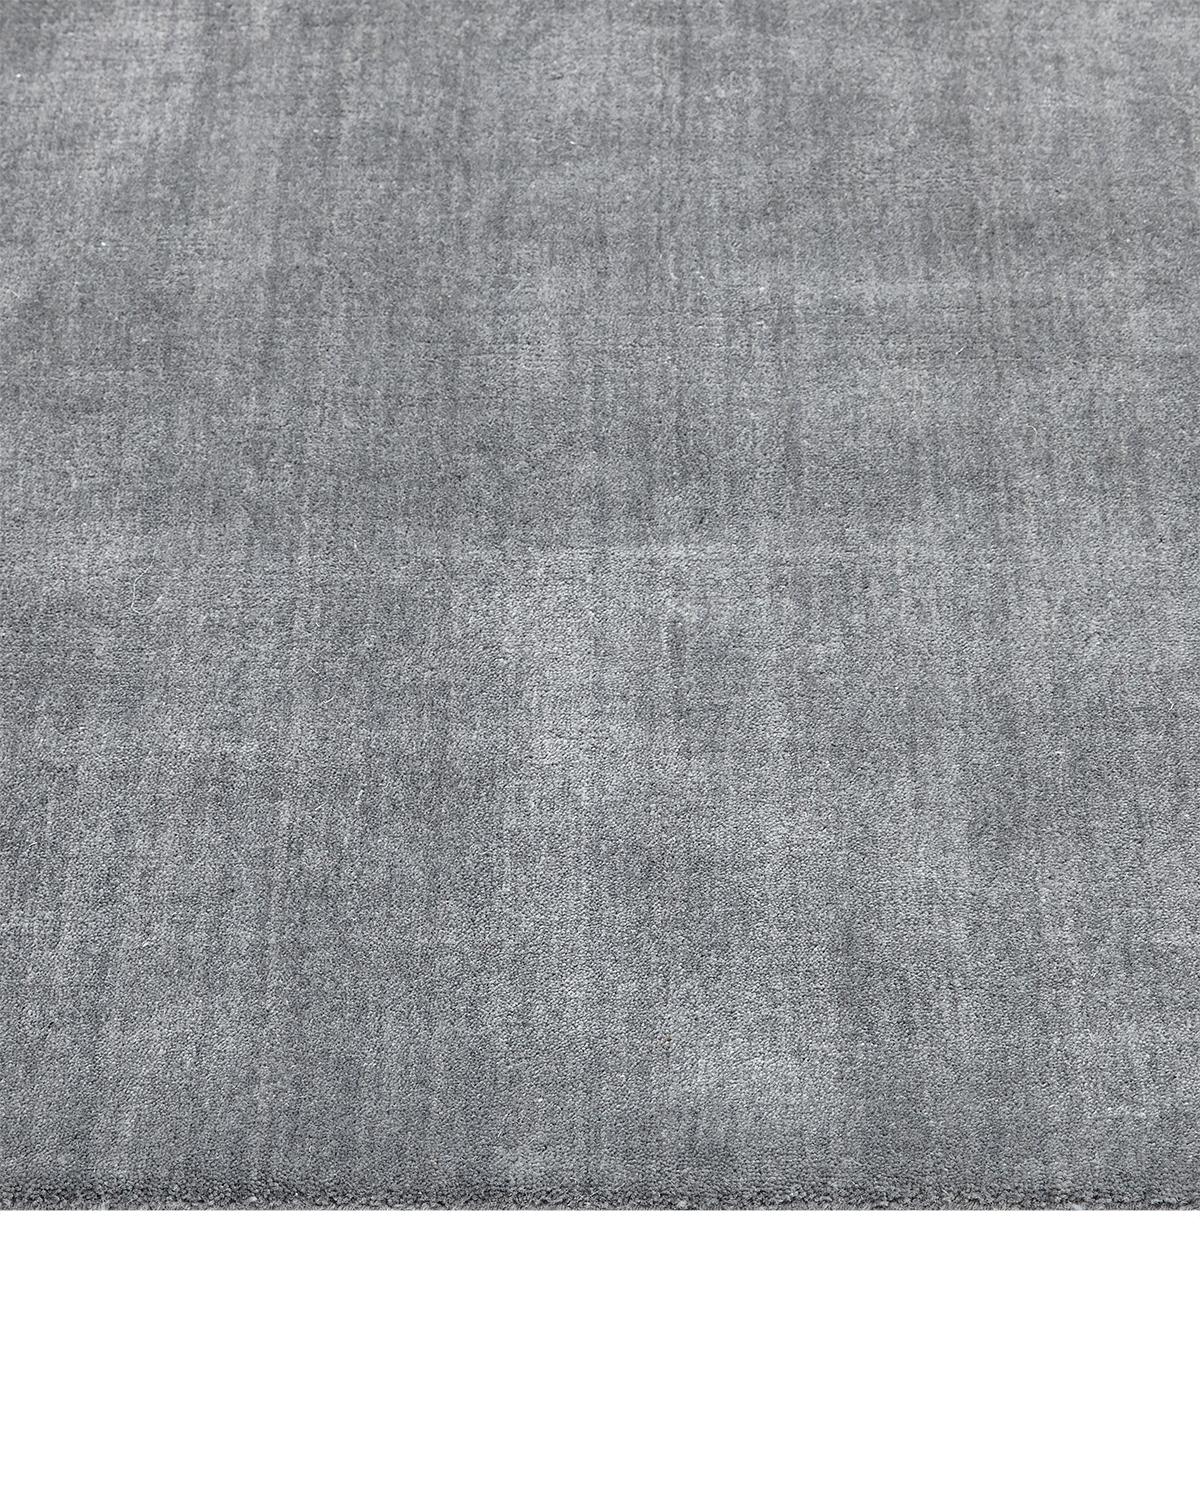 Solo Rugs Solid Modern Hand Loomed Gray Area Rug In New Condition For Sale In Norwalk, CT